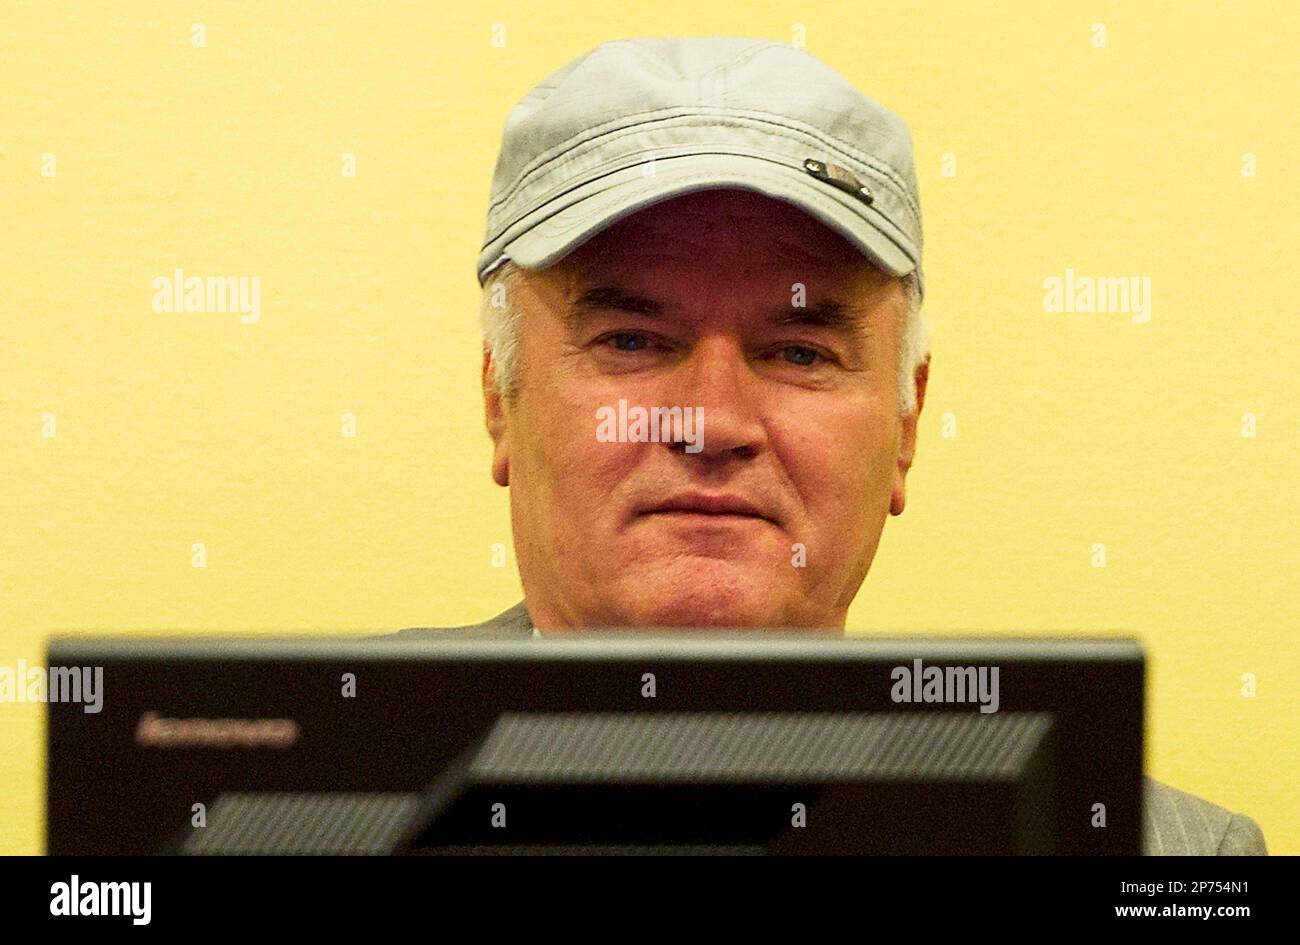 Former Bosnian Serb military chief Ratko Mladic sits in the court room during his further initial appearance at the U.N.'s Yugoslav war crimes tribunal in The Hague, Netherlands, Monday, July 4, 2011. Mladic has appeared in court at the Yugoslav war crimes tribunal to enter pleas to charges including genocide. The judge refused a request by Ratko Mladic's court-appointed lawyer to postpone initial plea. (AP Photo/ Valerie Kuypers, Pool) Stock Photo